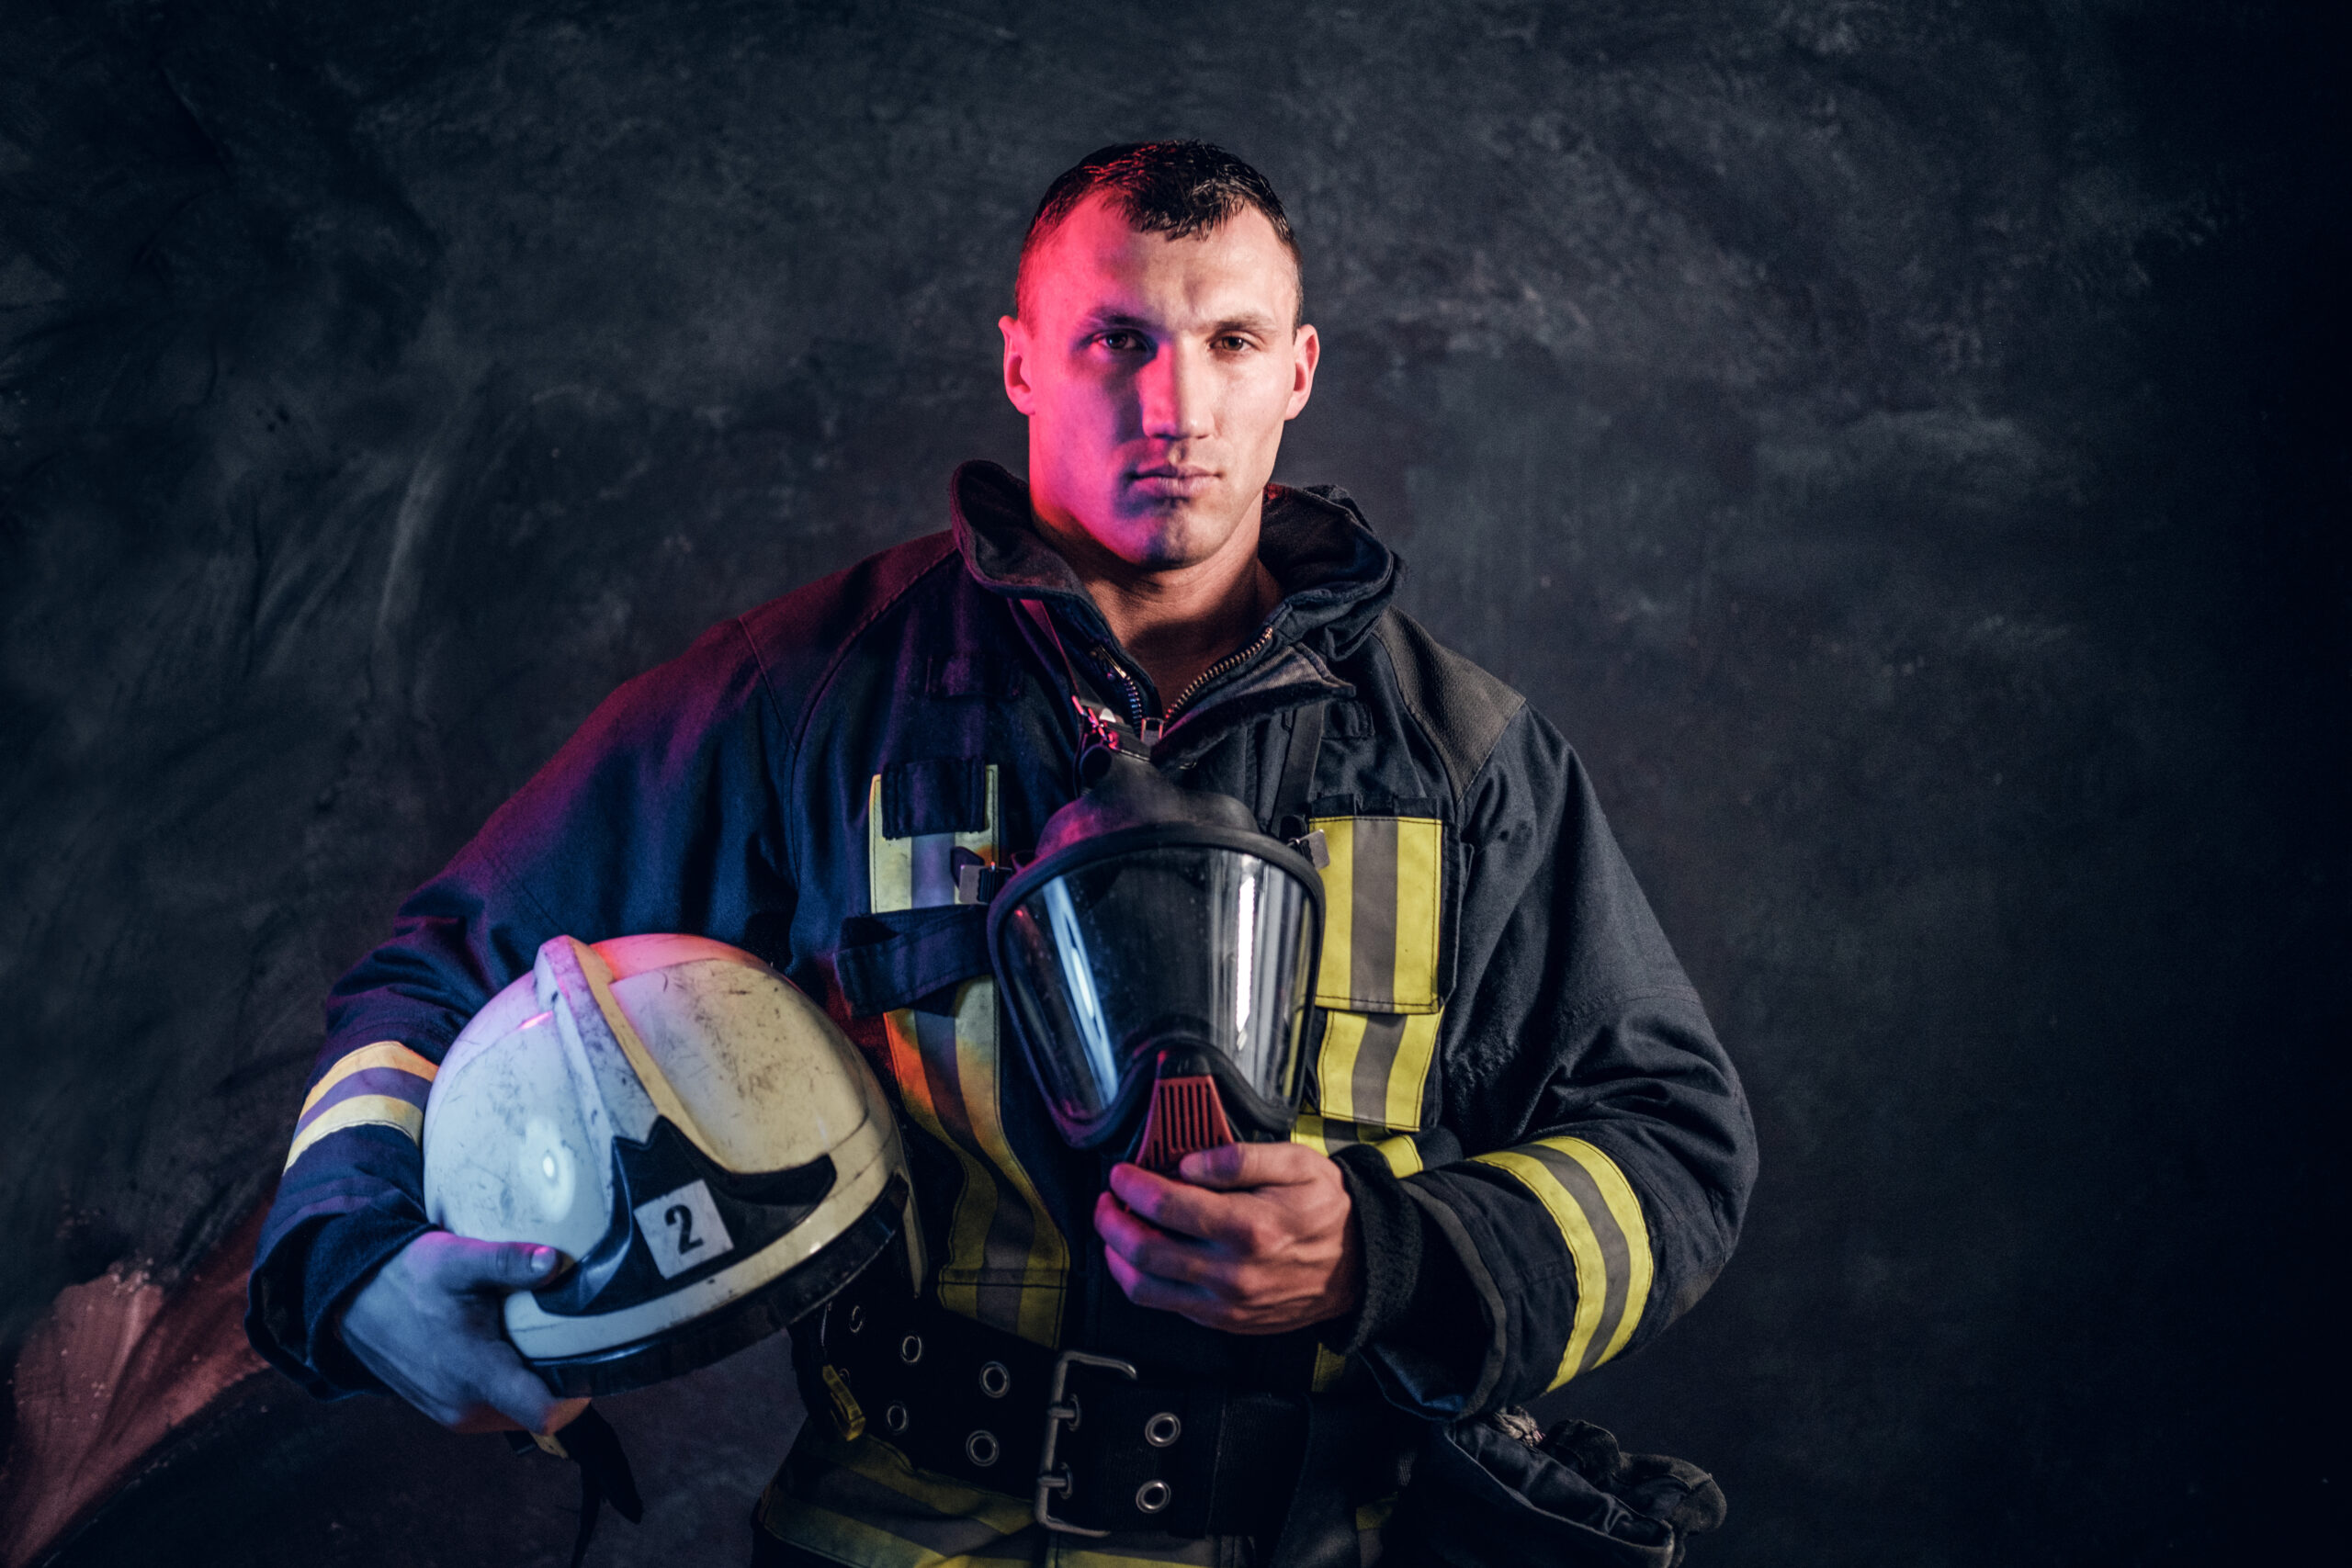 A firefighter holding his helmet in his hands, symbolizing the challenges and vulnerabilities faced by first responders in combating addiction risk.